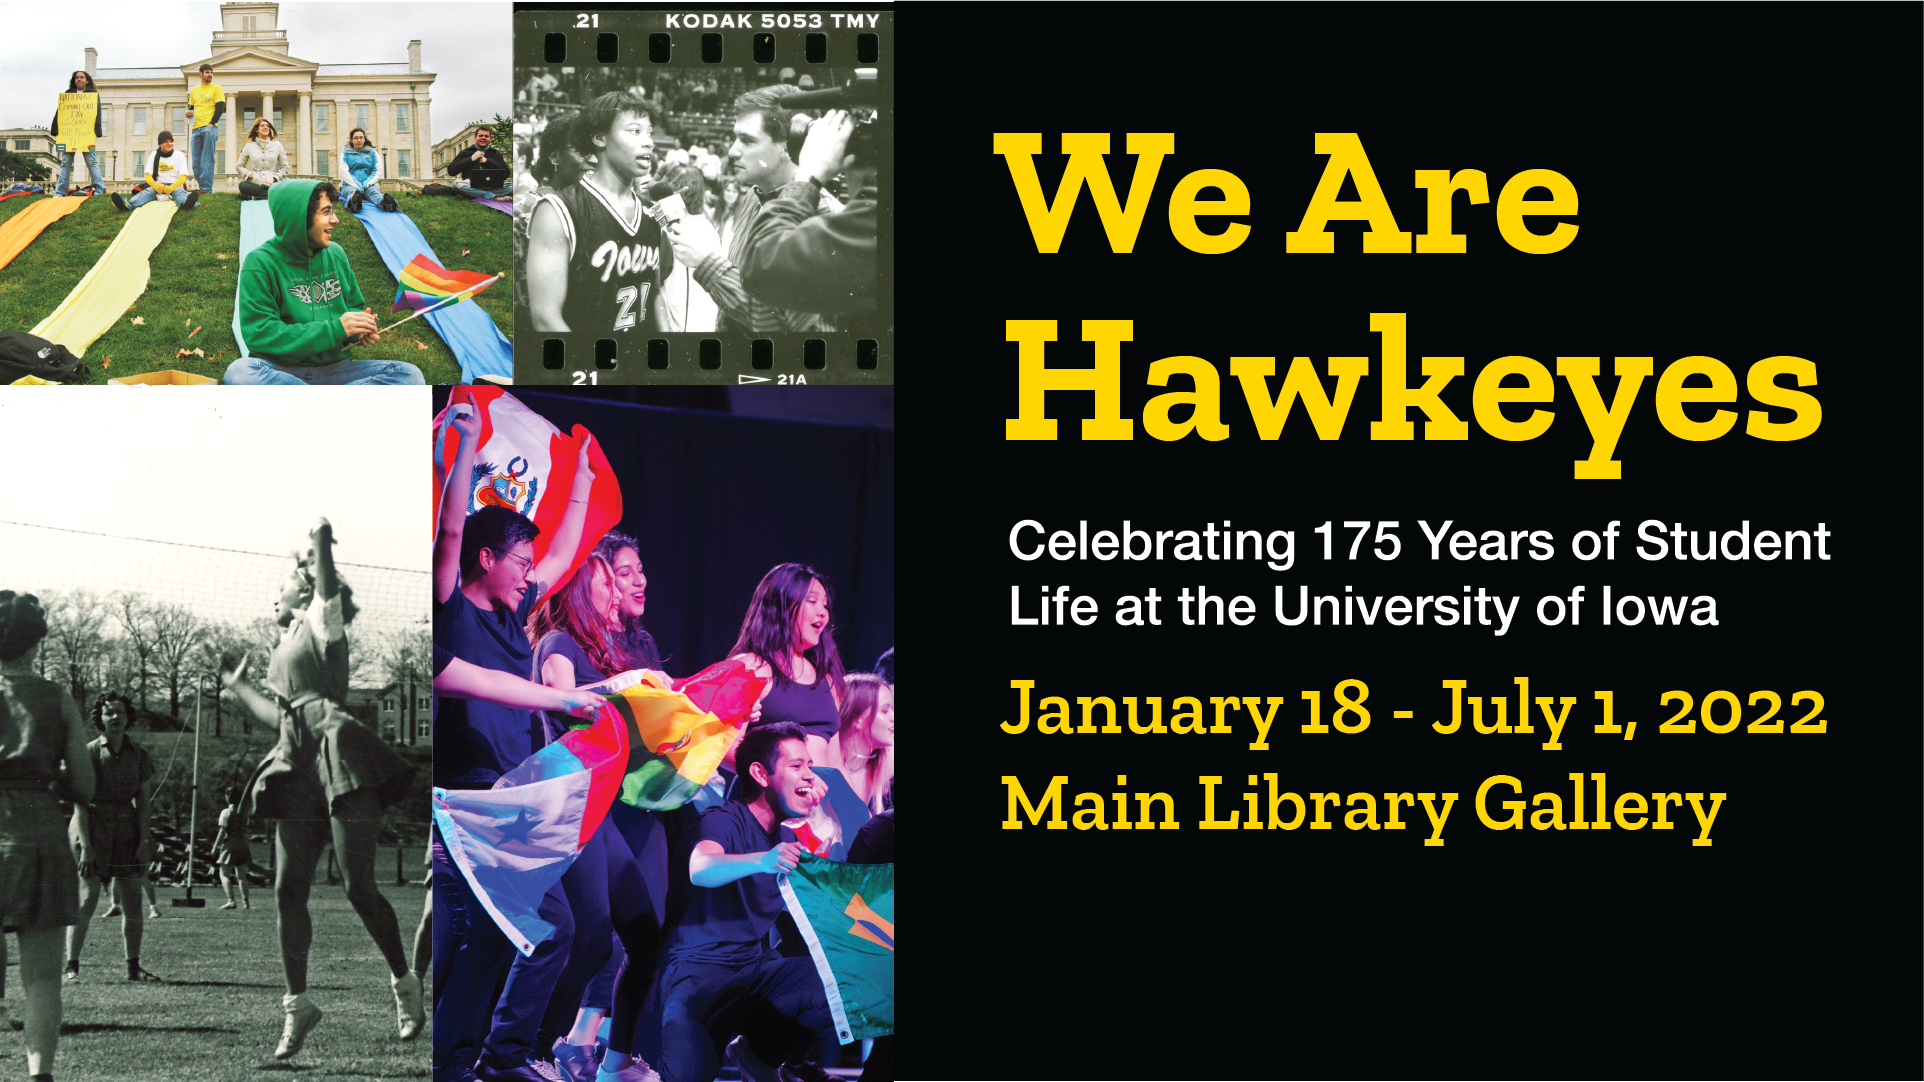 We Are Hawkeyes: Celebrating 175 Years of Student Life at the UI